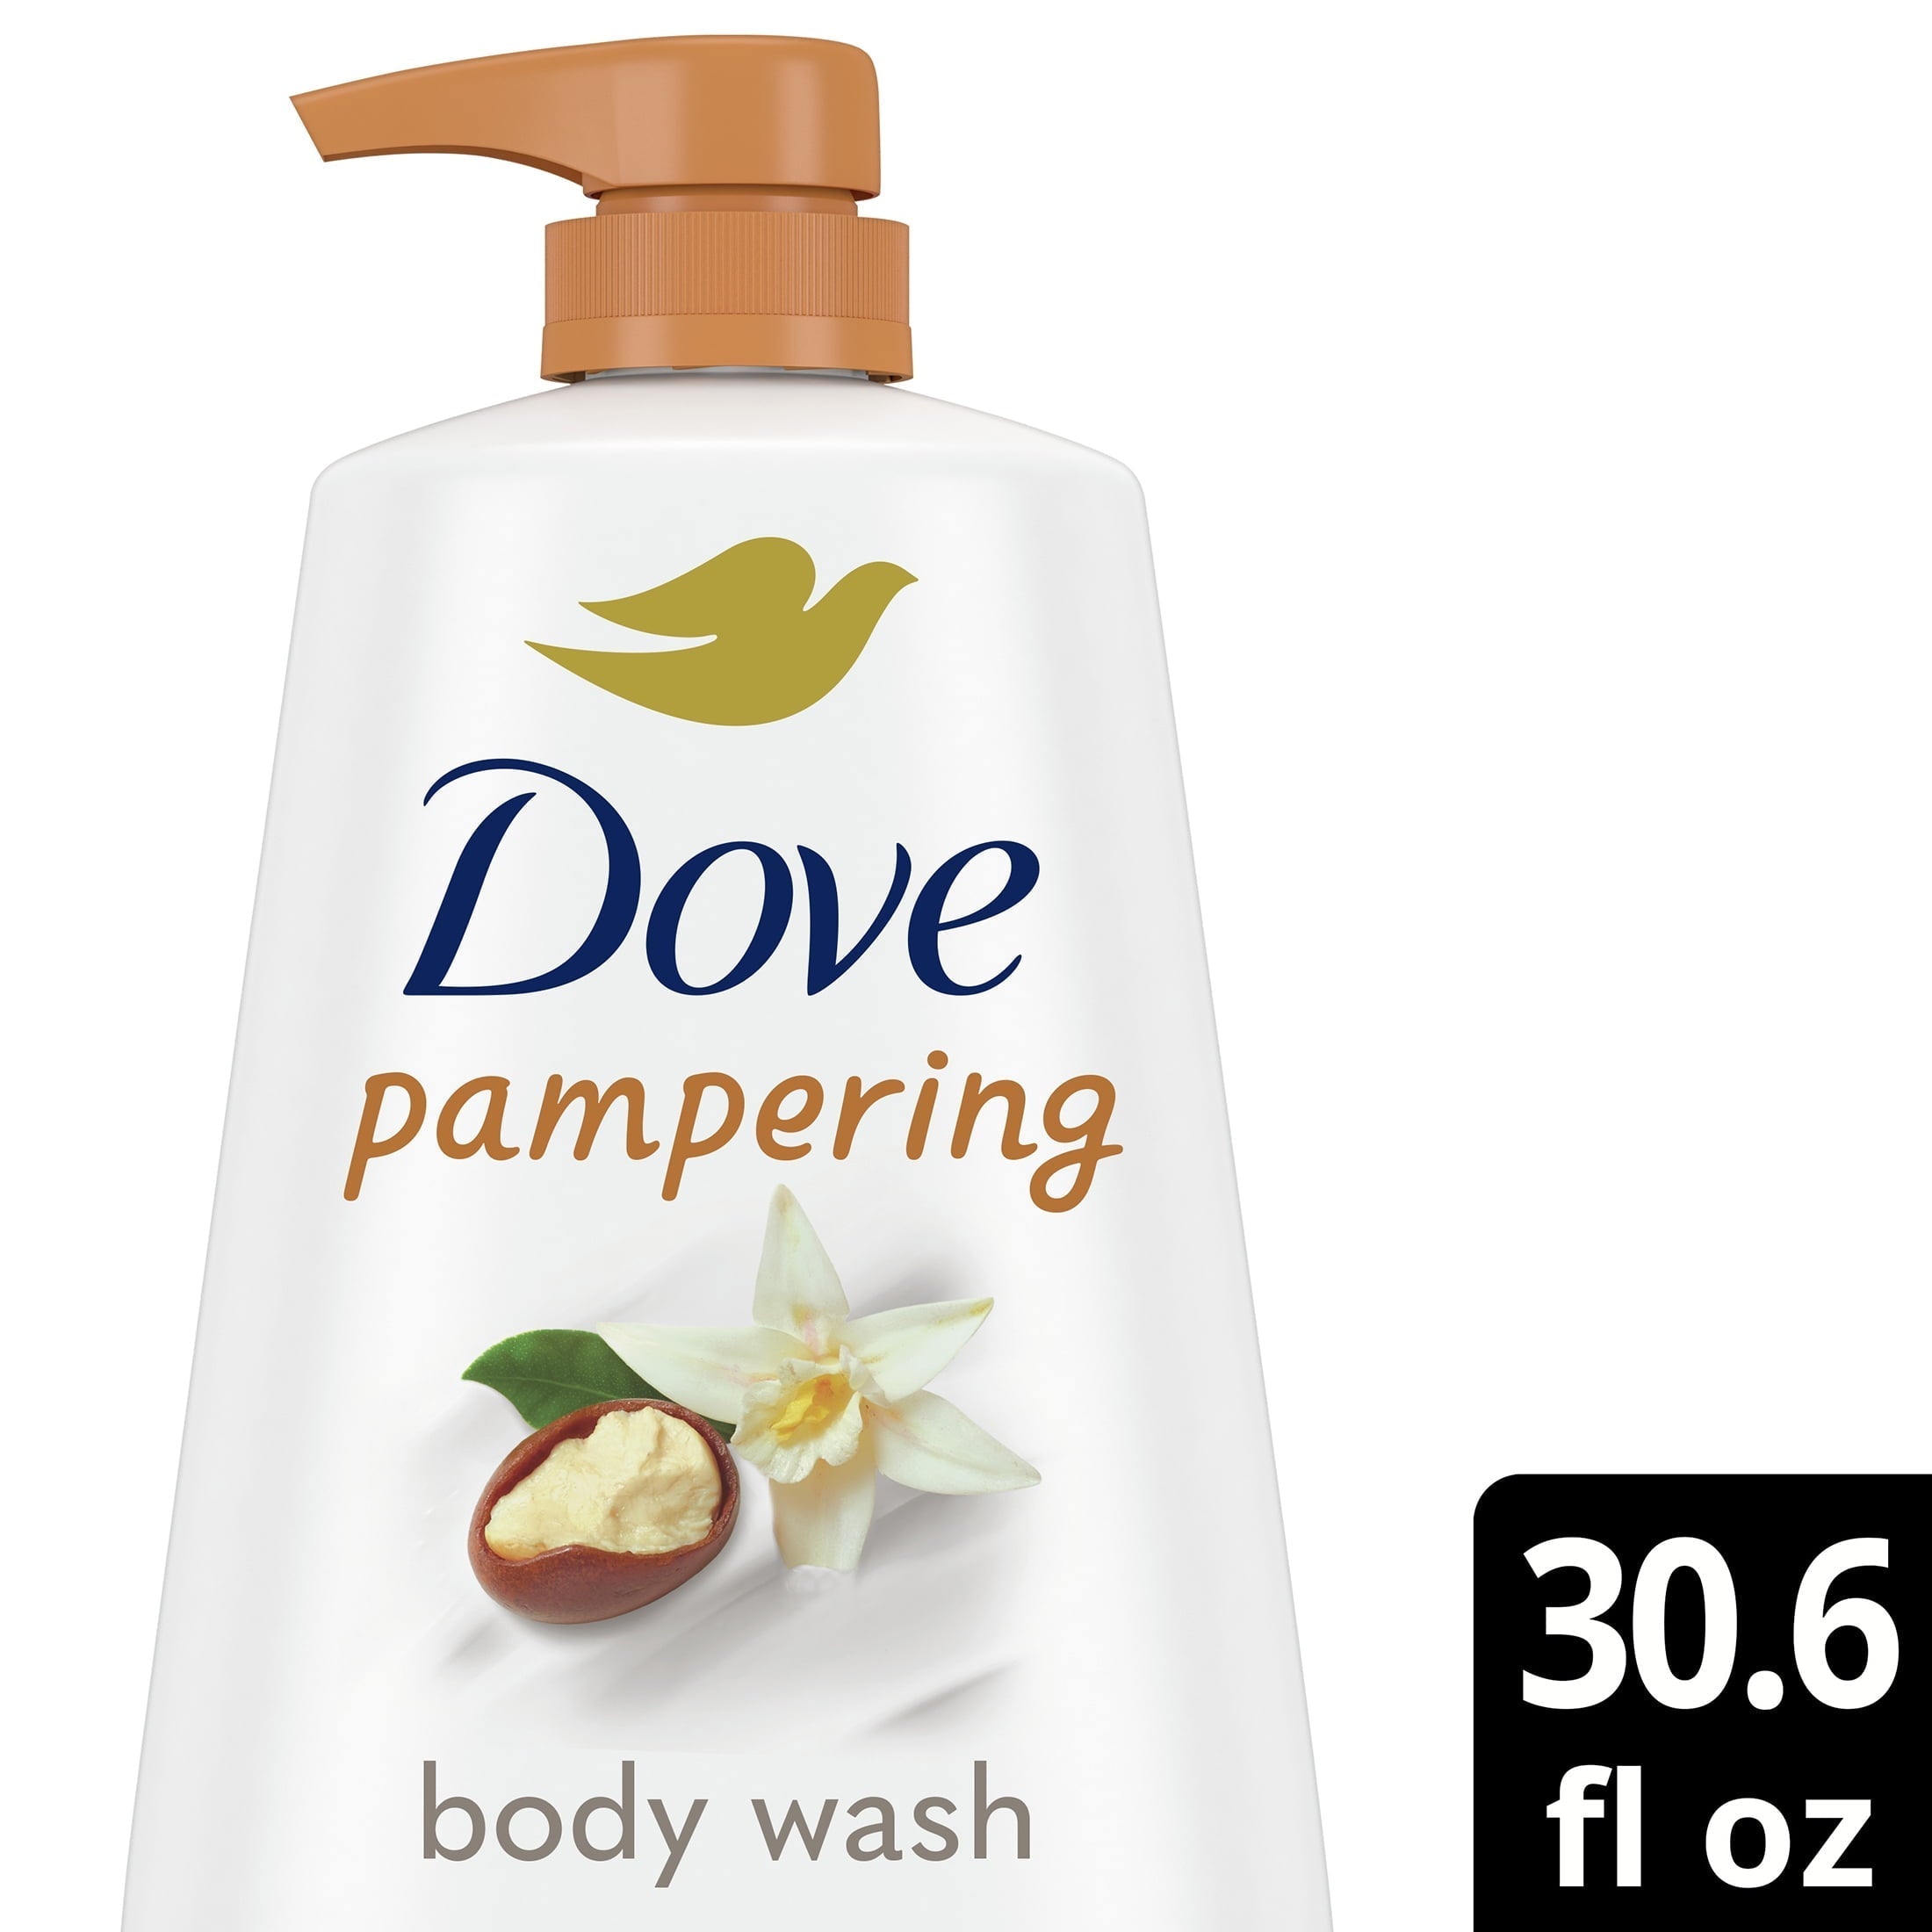 Wholesale prices with free shipping all over United States Dove Purely Pampering Liquid Body Wash with Pump Shea Butter & Vanilla, 30.6 oz - Steven Deals